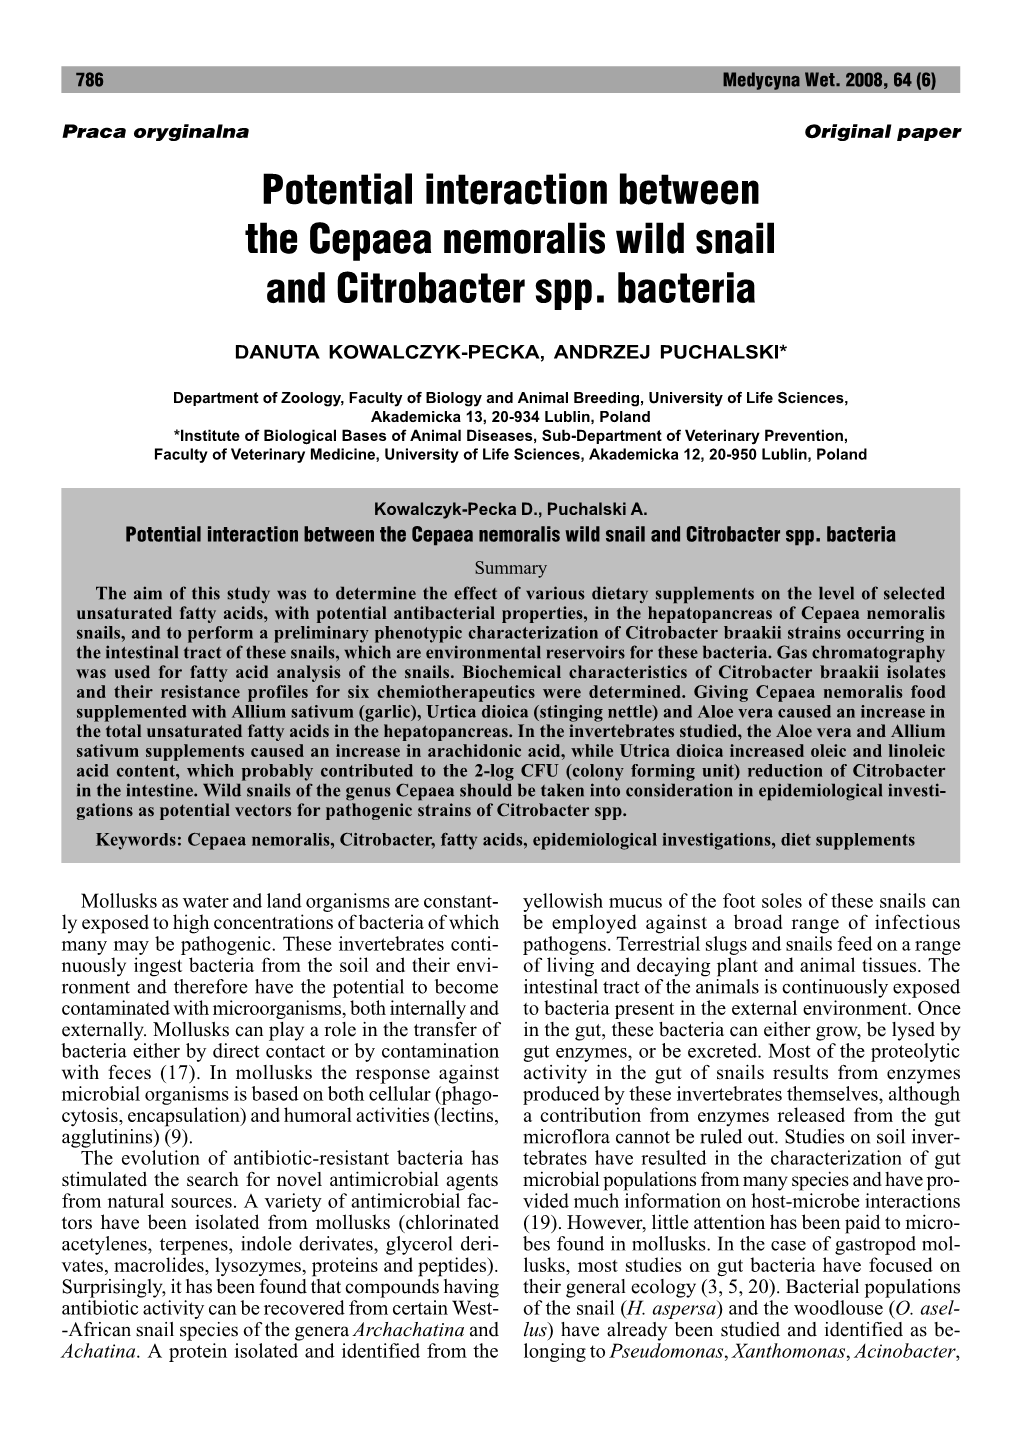 Potential Interaction Between the Cepaea Nemoralis Wild Snail and Citrobacter Spp